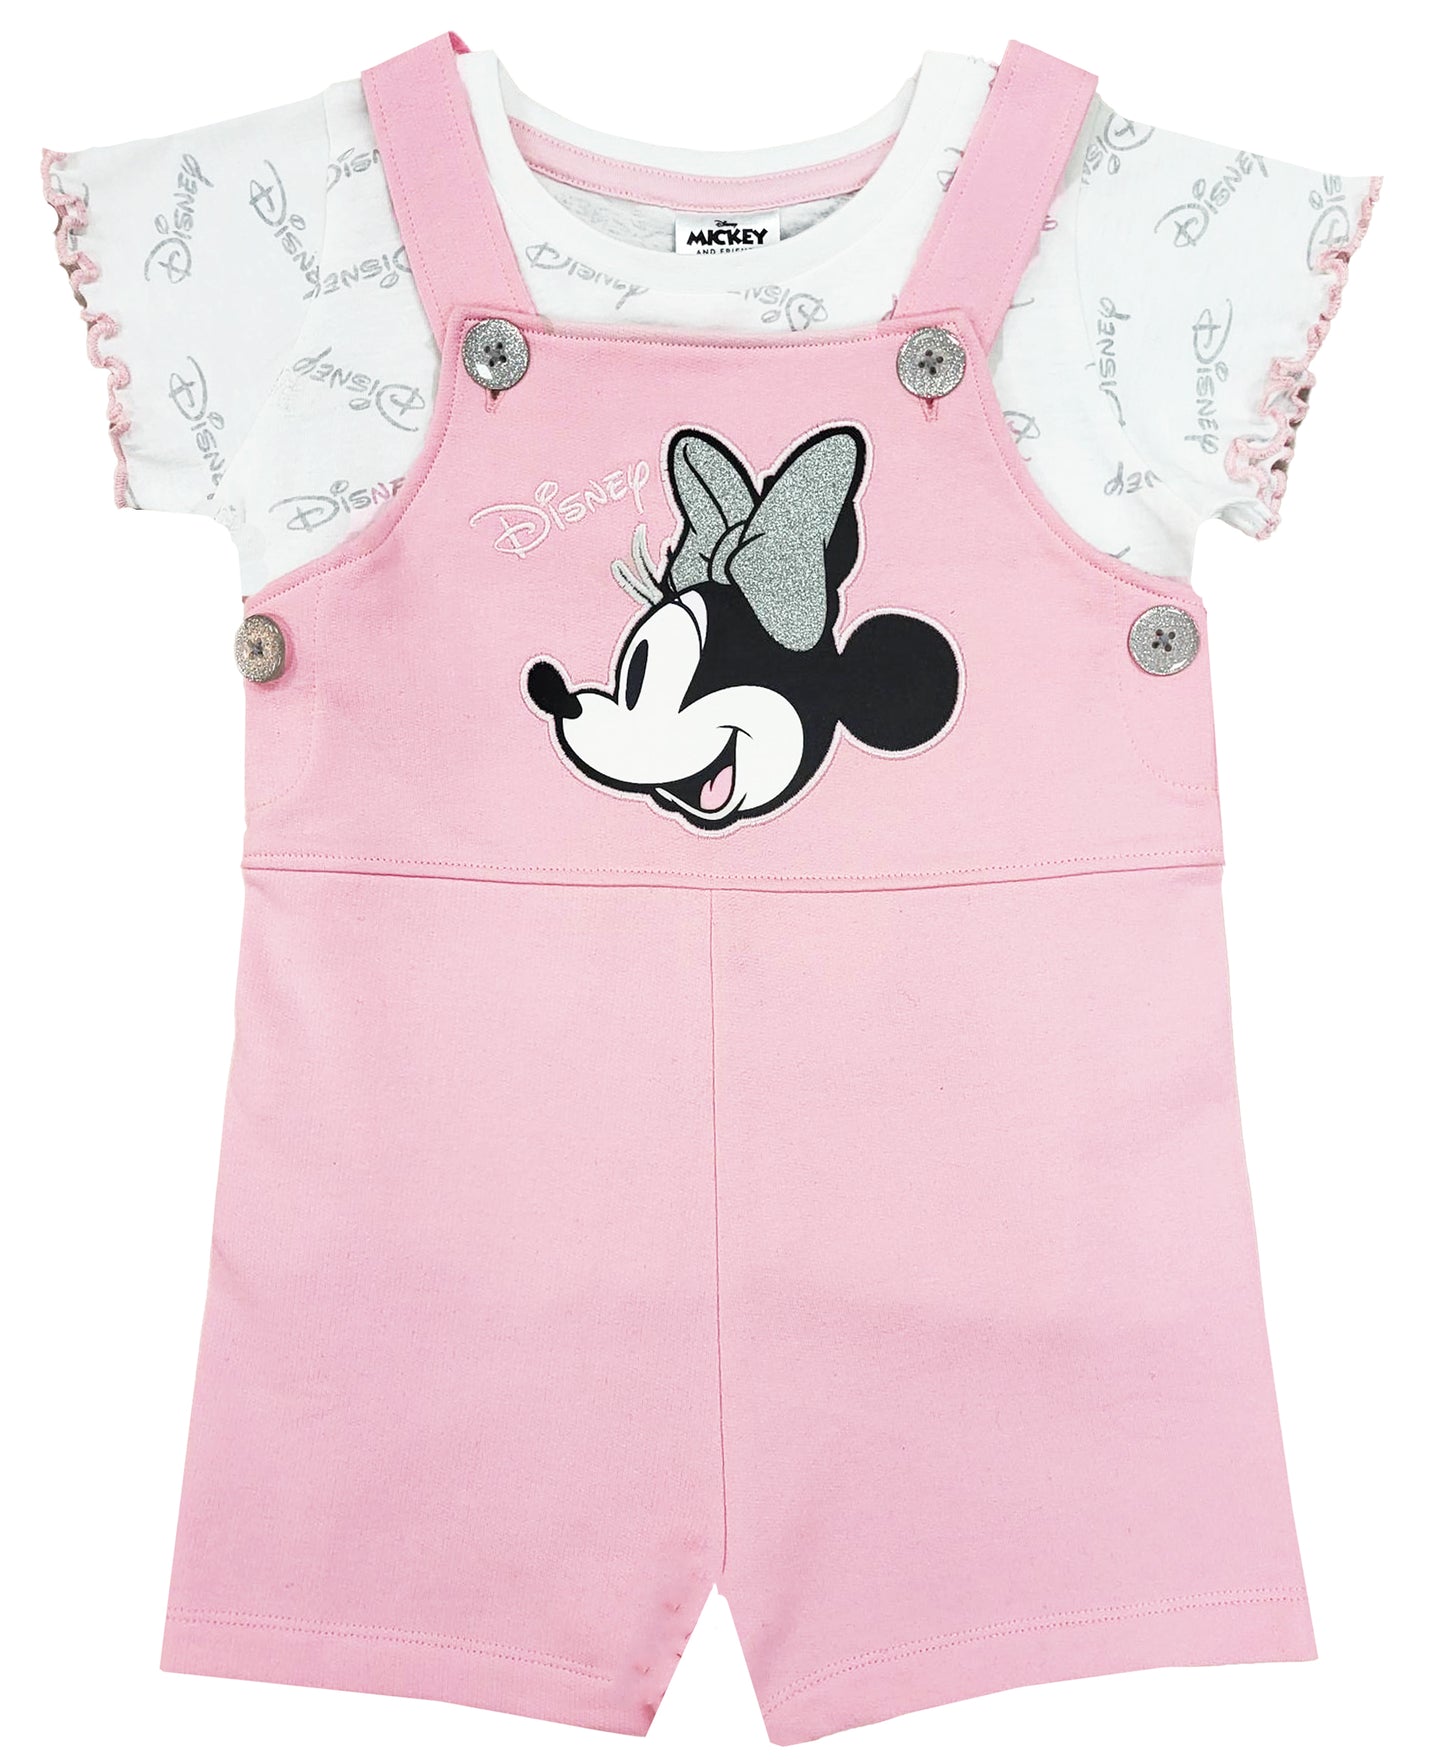 Girls Disney Minnie Mouse Dungaree Outfit